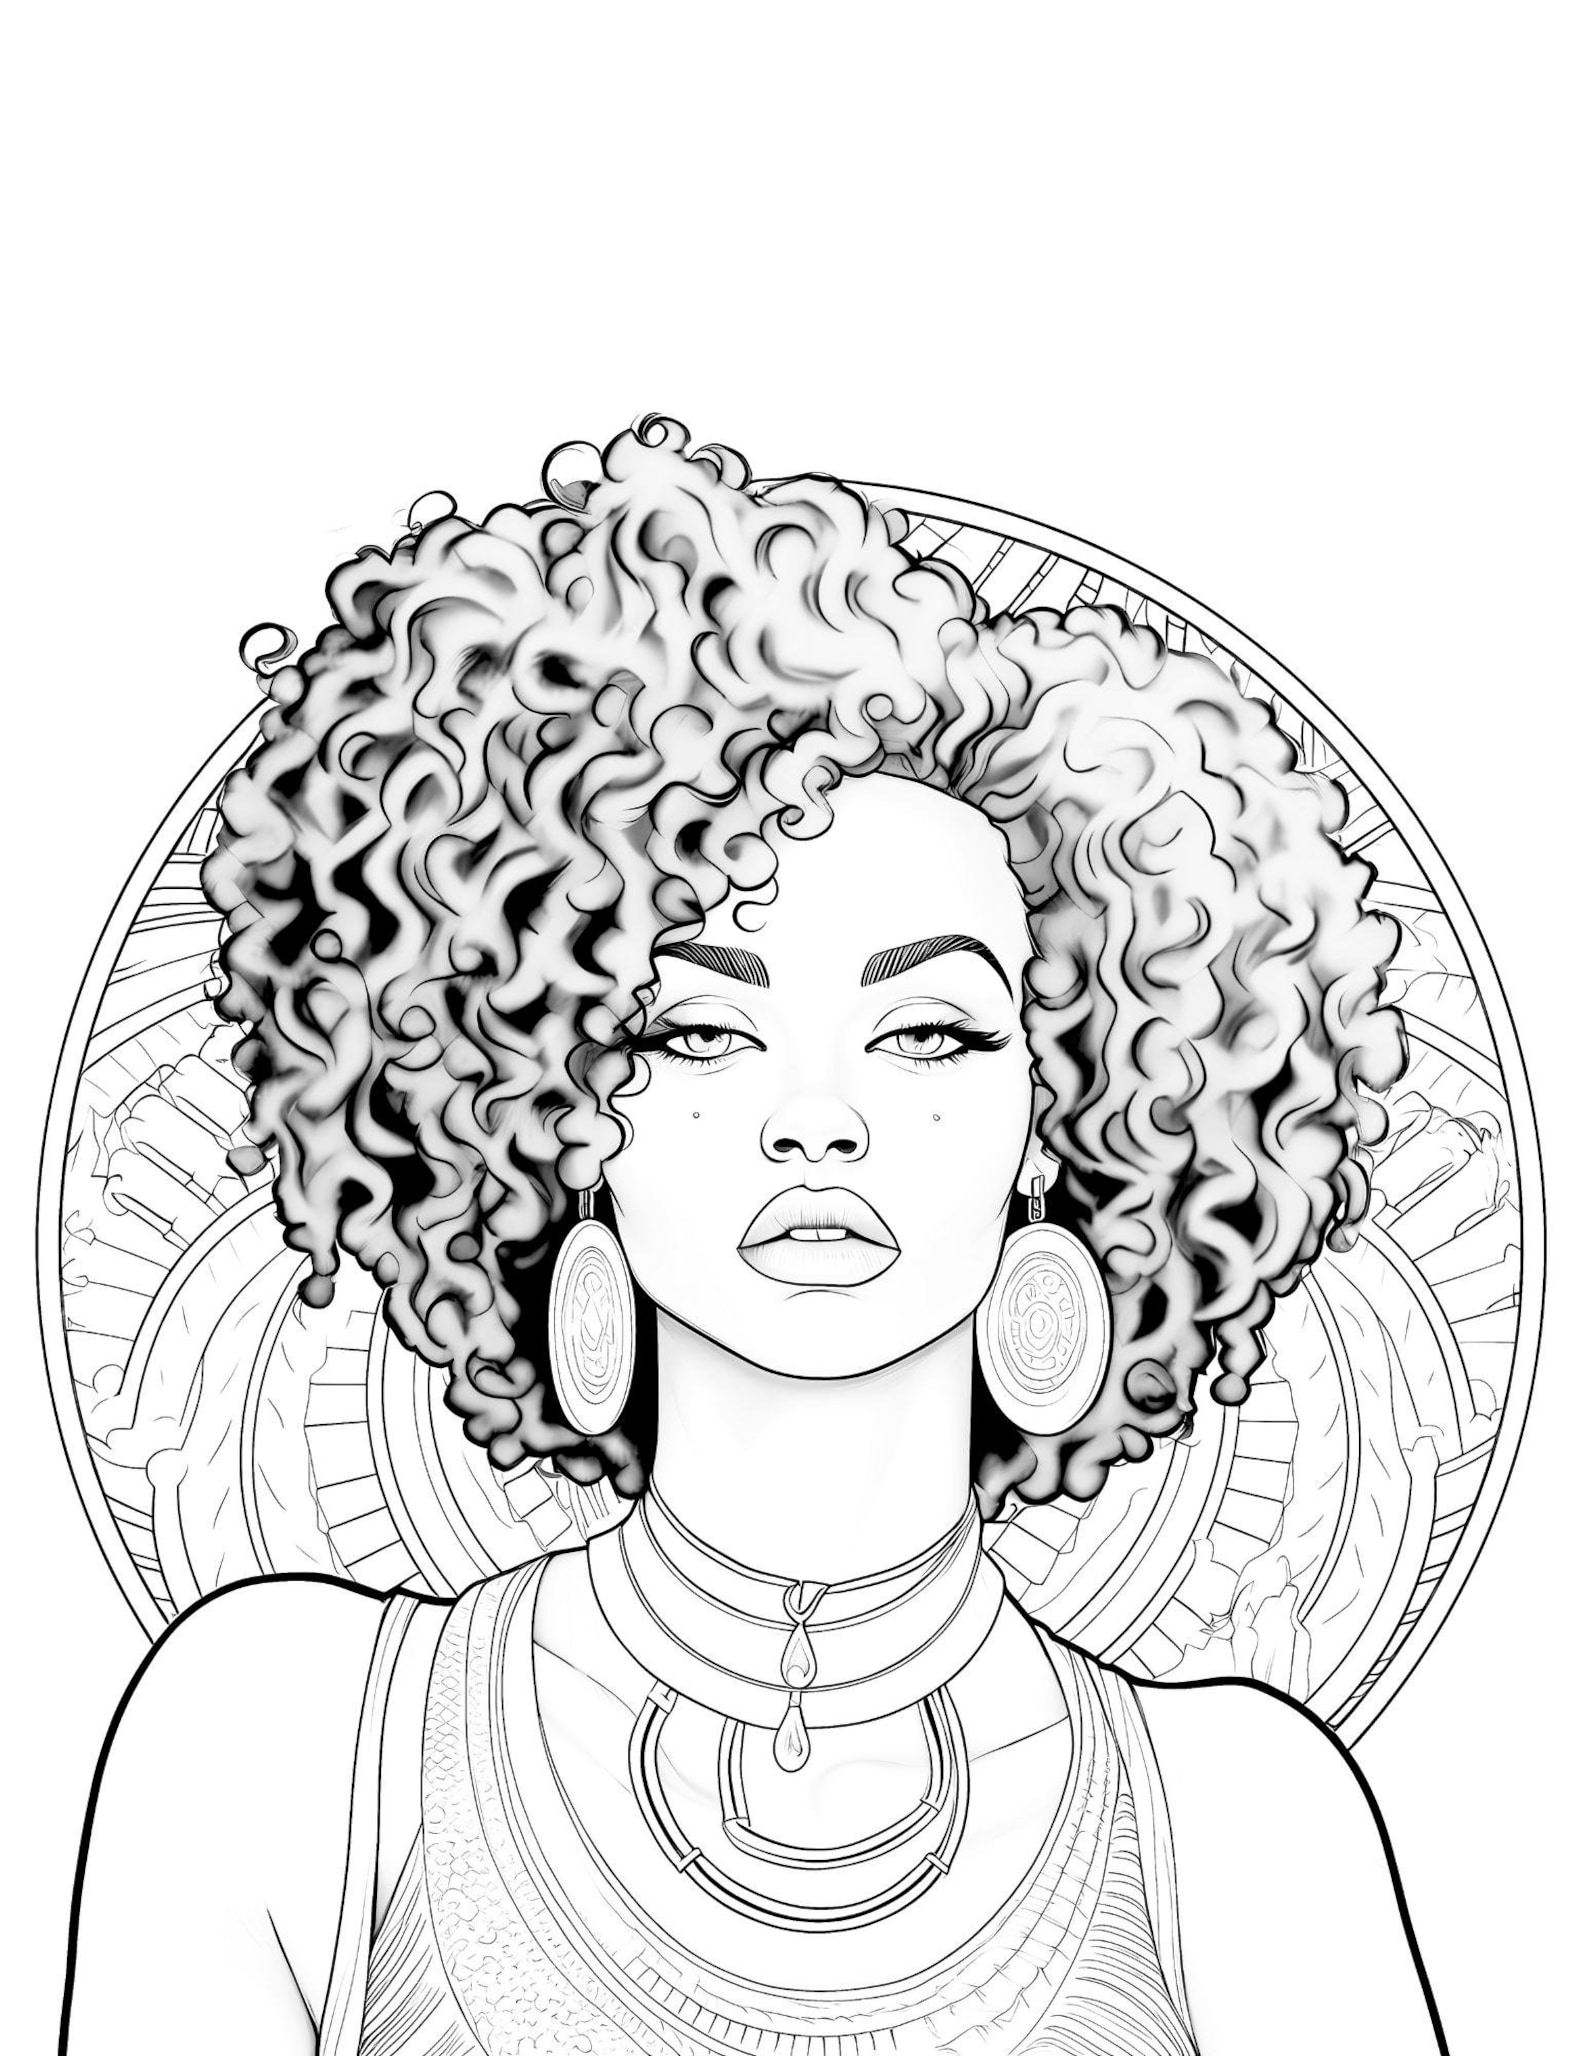 10 Black Woman Coloring Pages, African American Coloring Pages, Adult ...